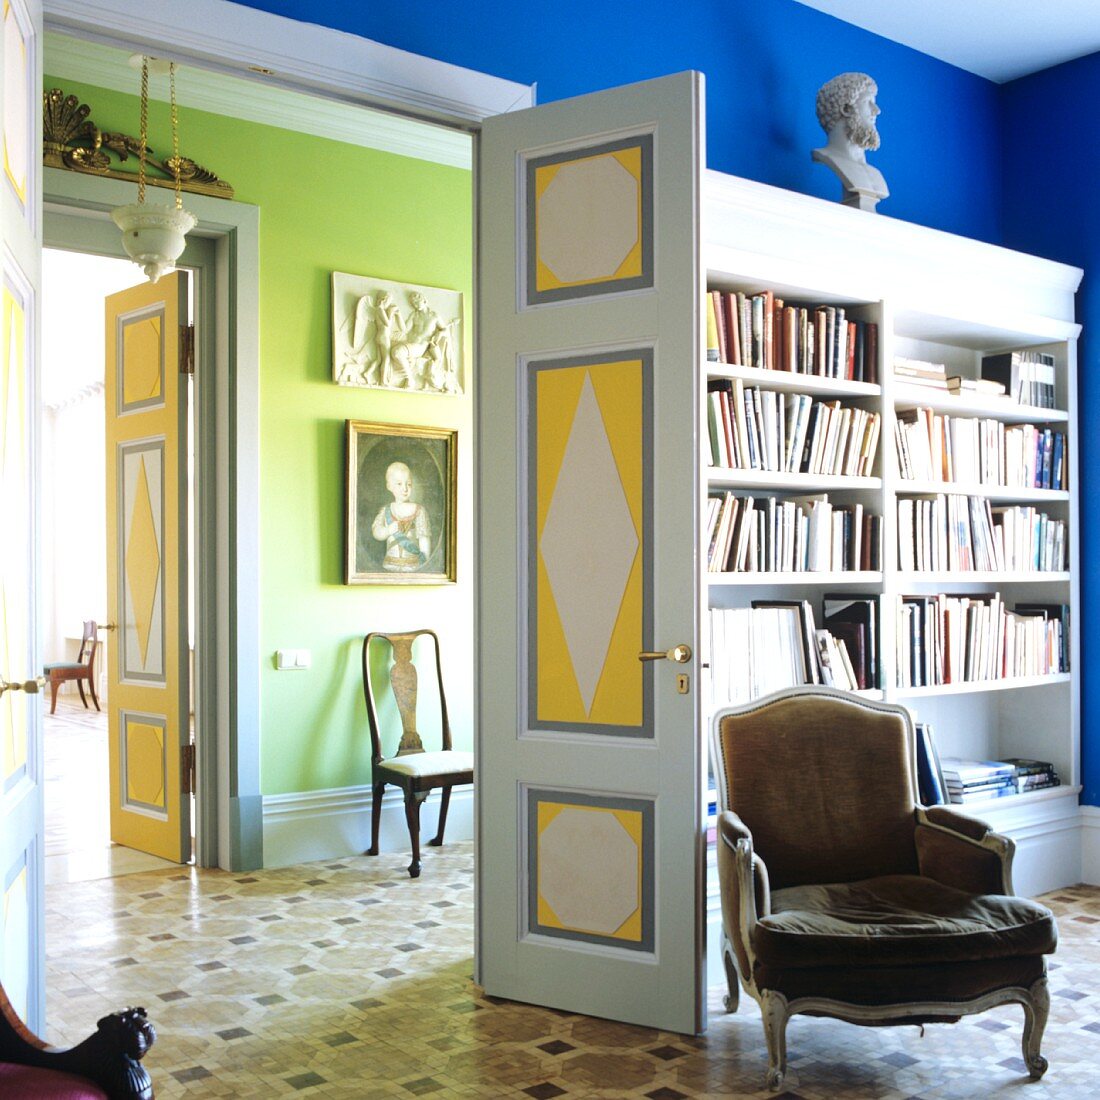 Rococo armchair in front of fitted bookshelves in blue interior; view into green room through open double doors in grand house